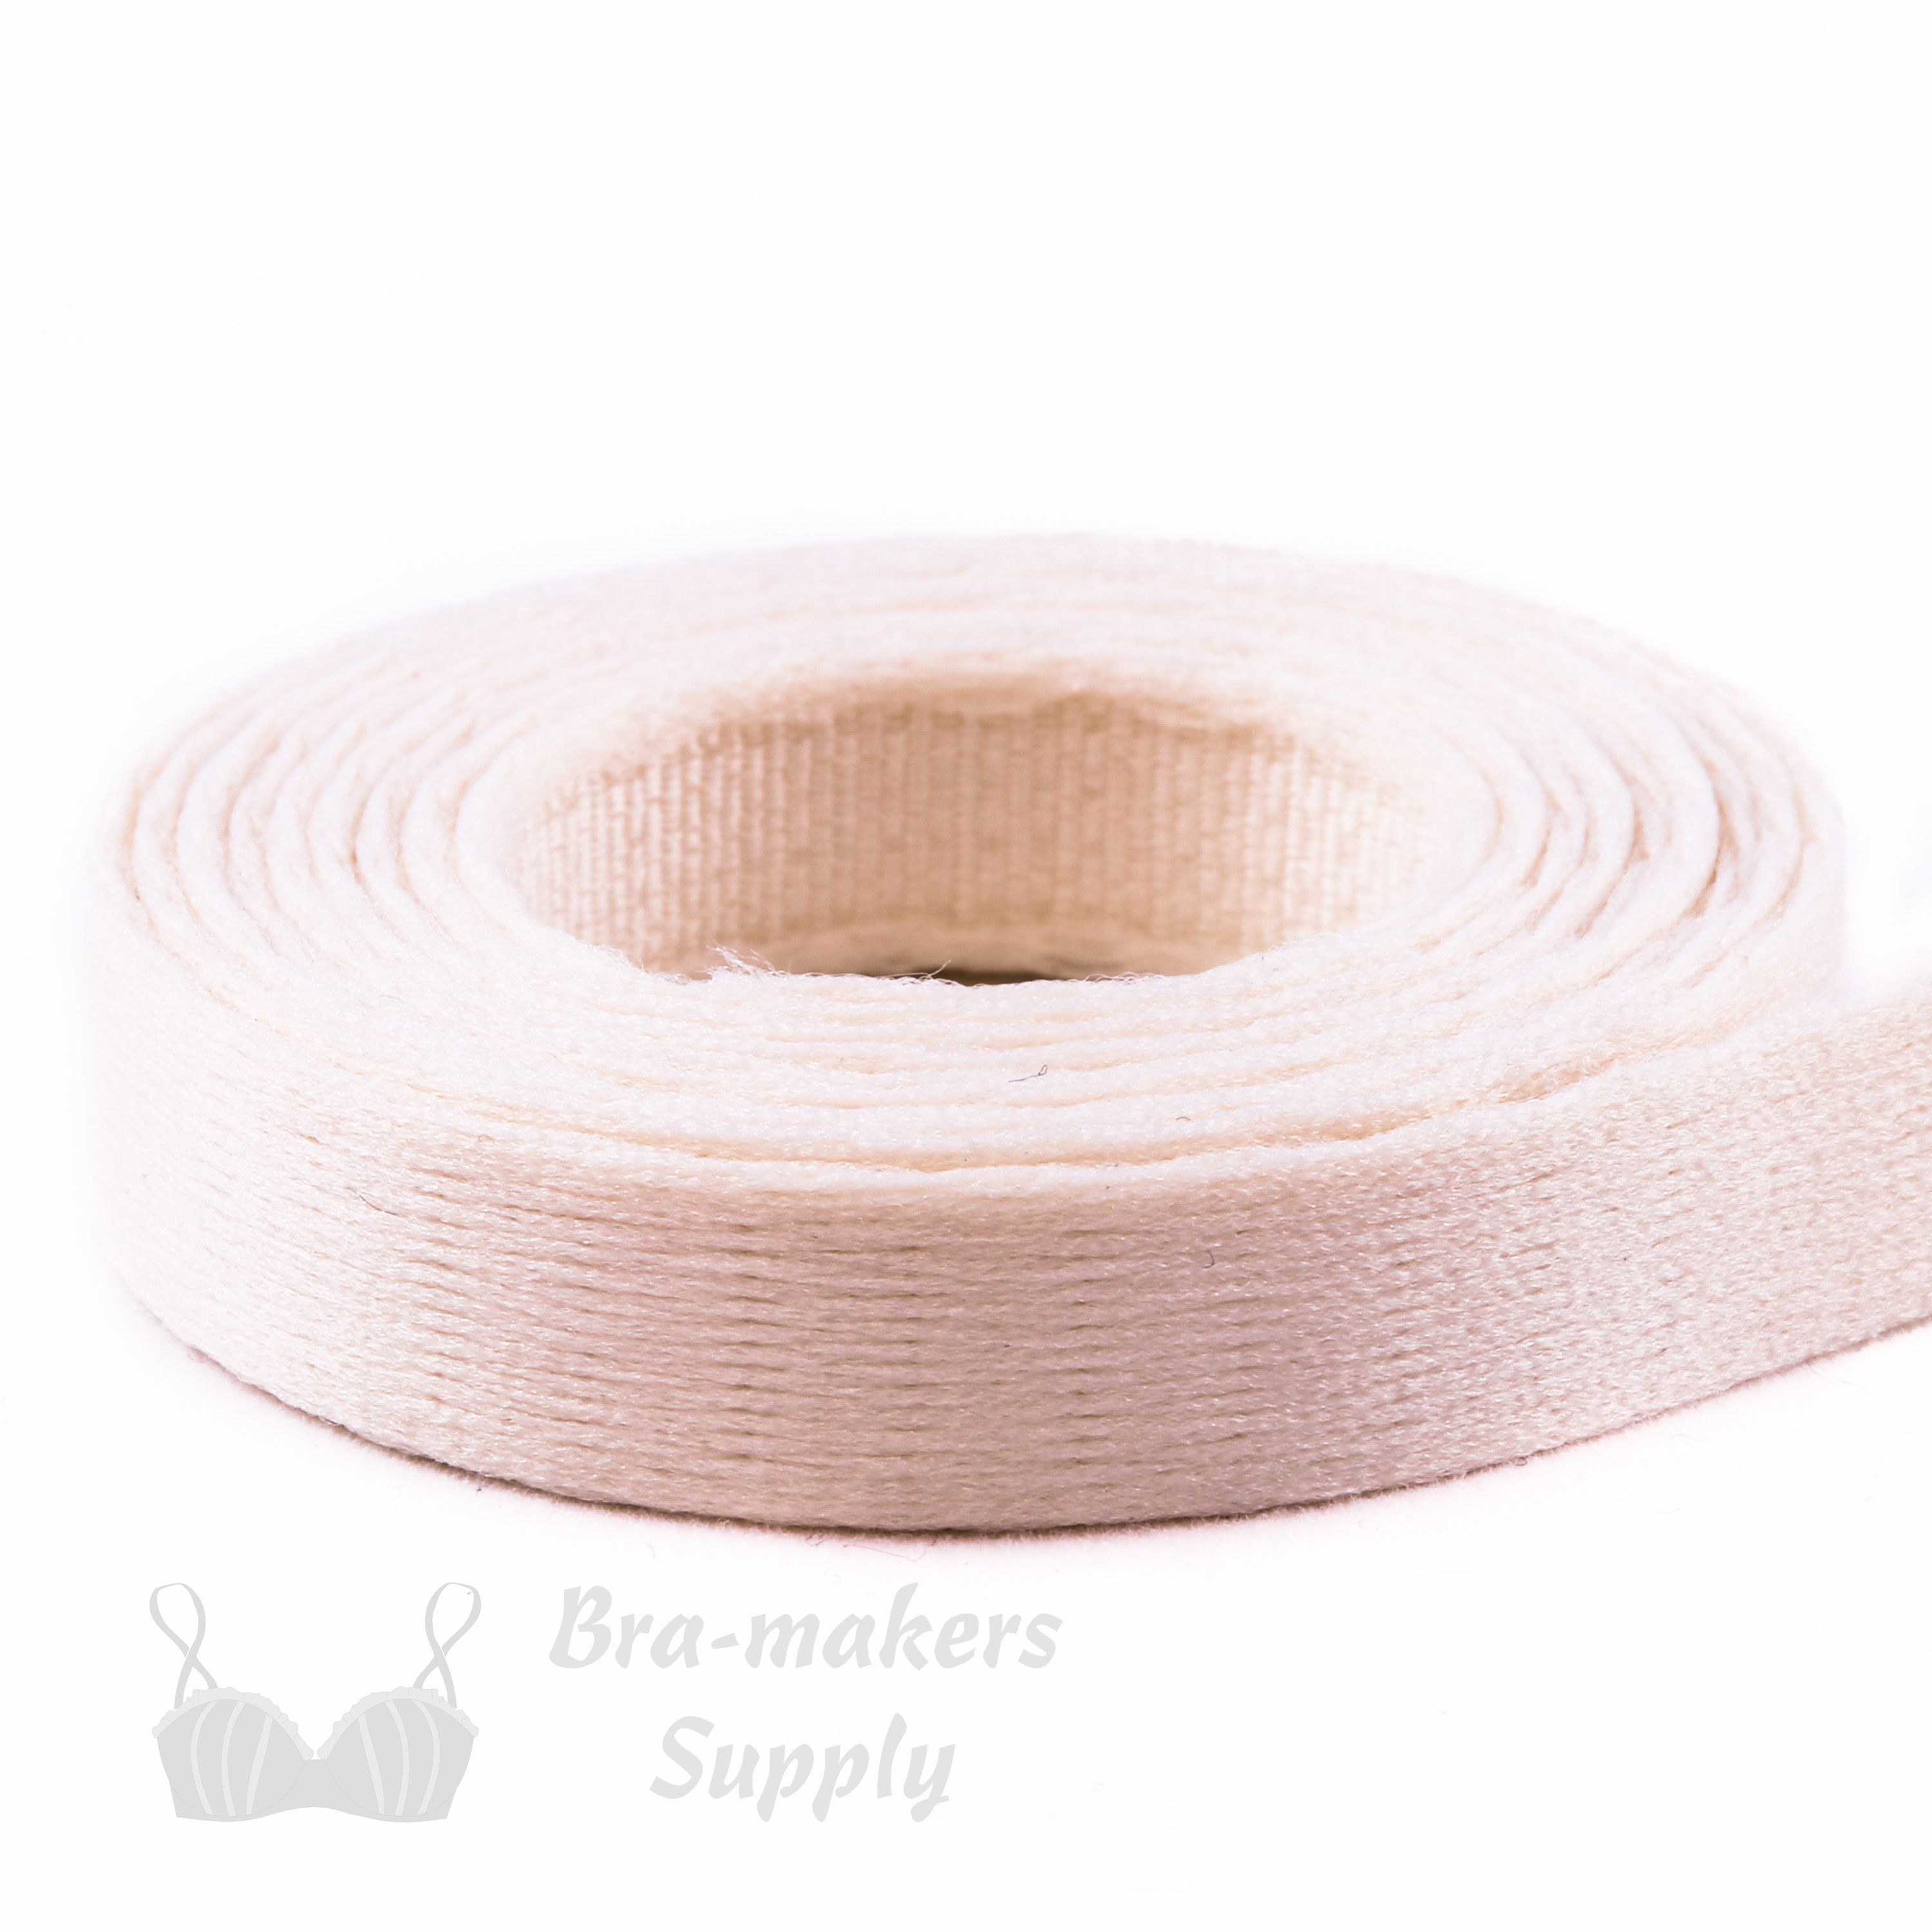 plush underwire casing peach UP-2 or underwire channeling Linen Pantone 12-1008 from Bra-makers Supply 1 metre roll shown